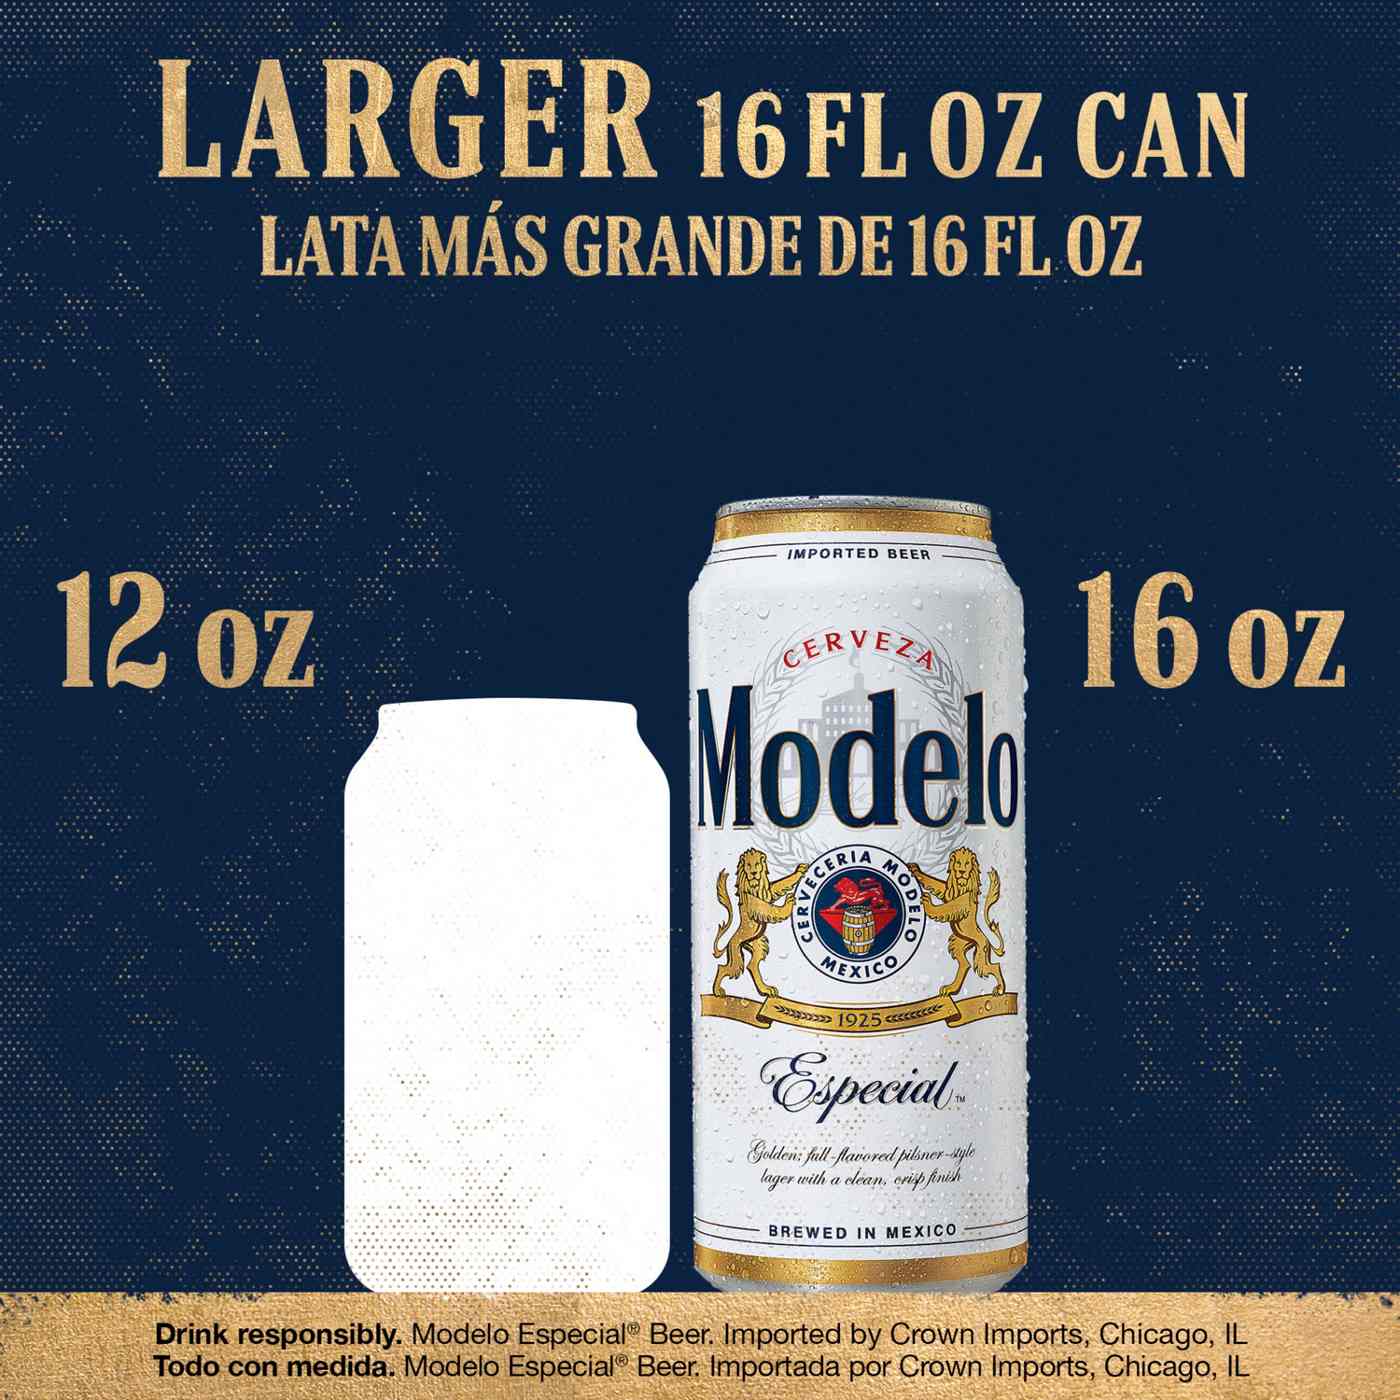 Modelo Especial Mexican Lager Import Beer 16 oz Cans, 4 pk; image 4 of 7